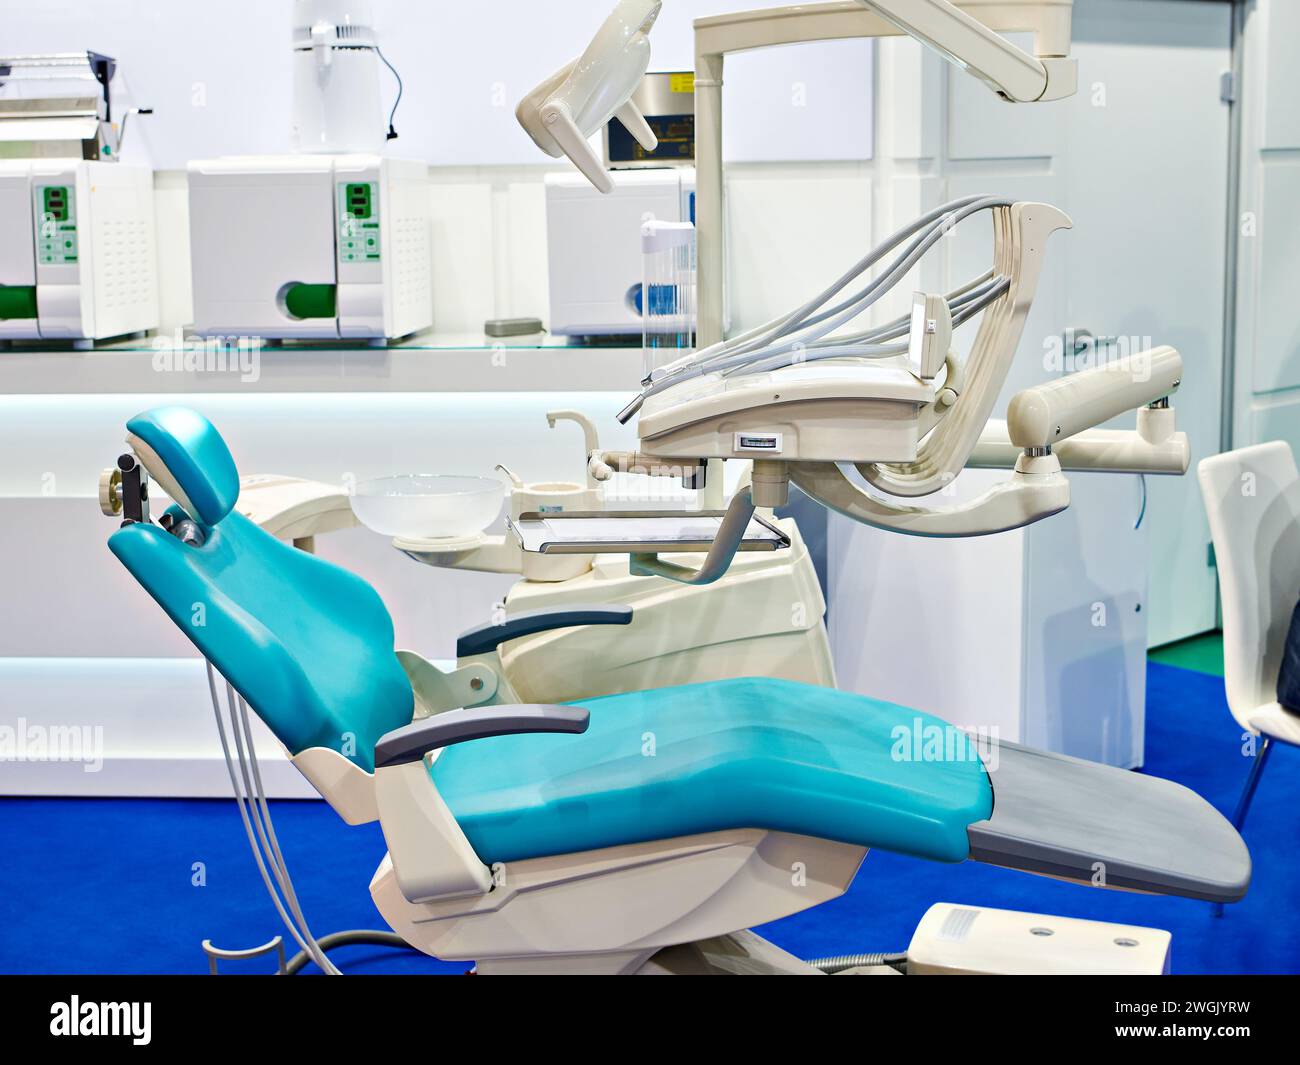 Dental chair and clinic equipment at the exhibition Stock Photo